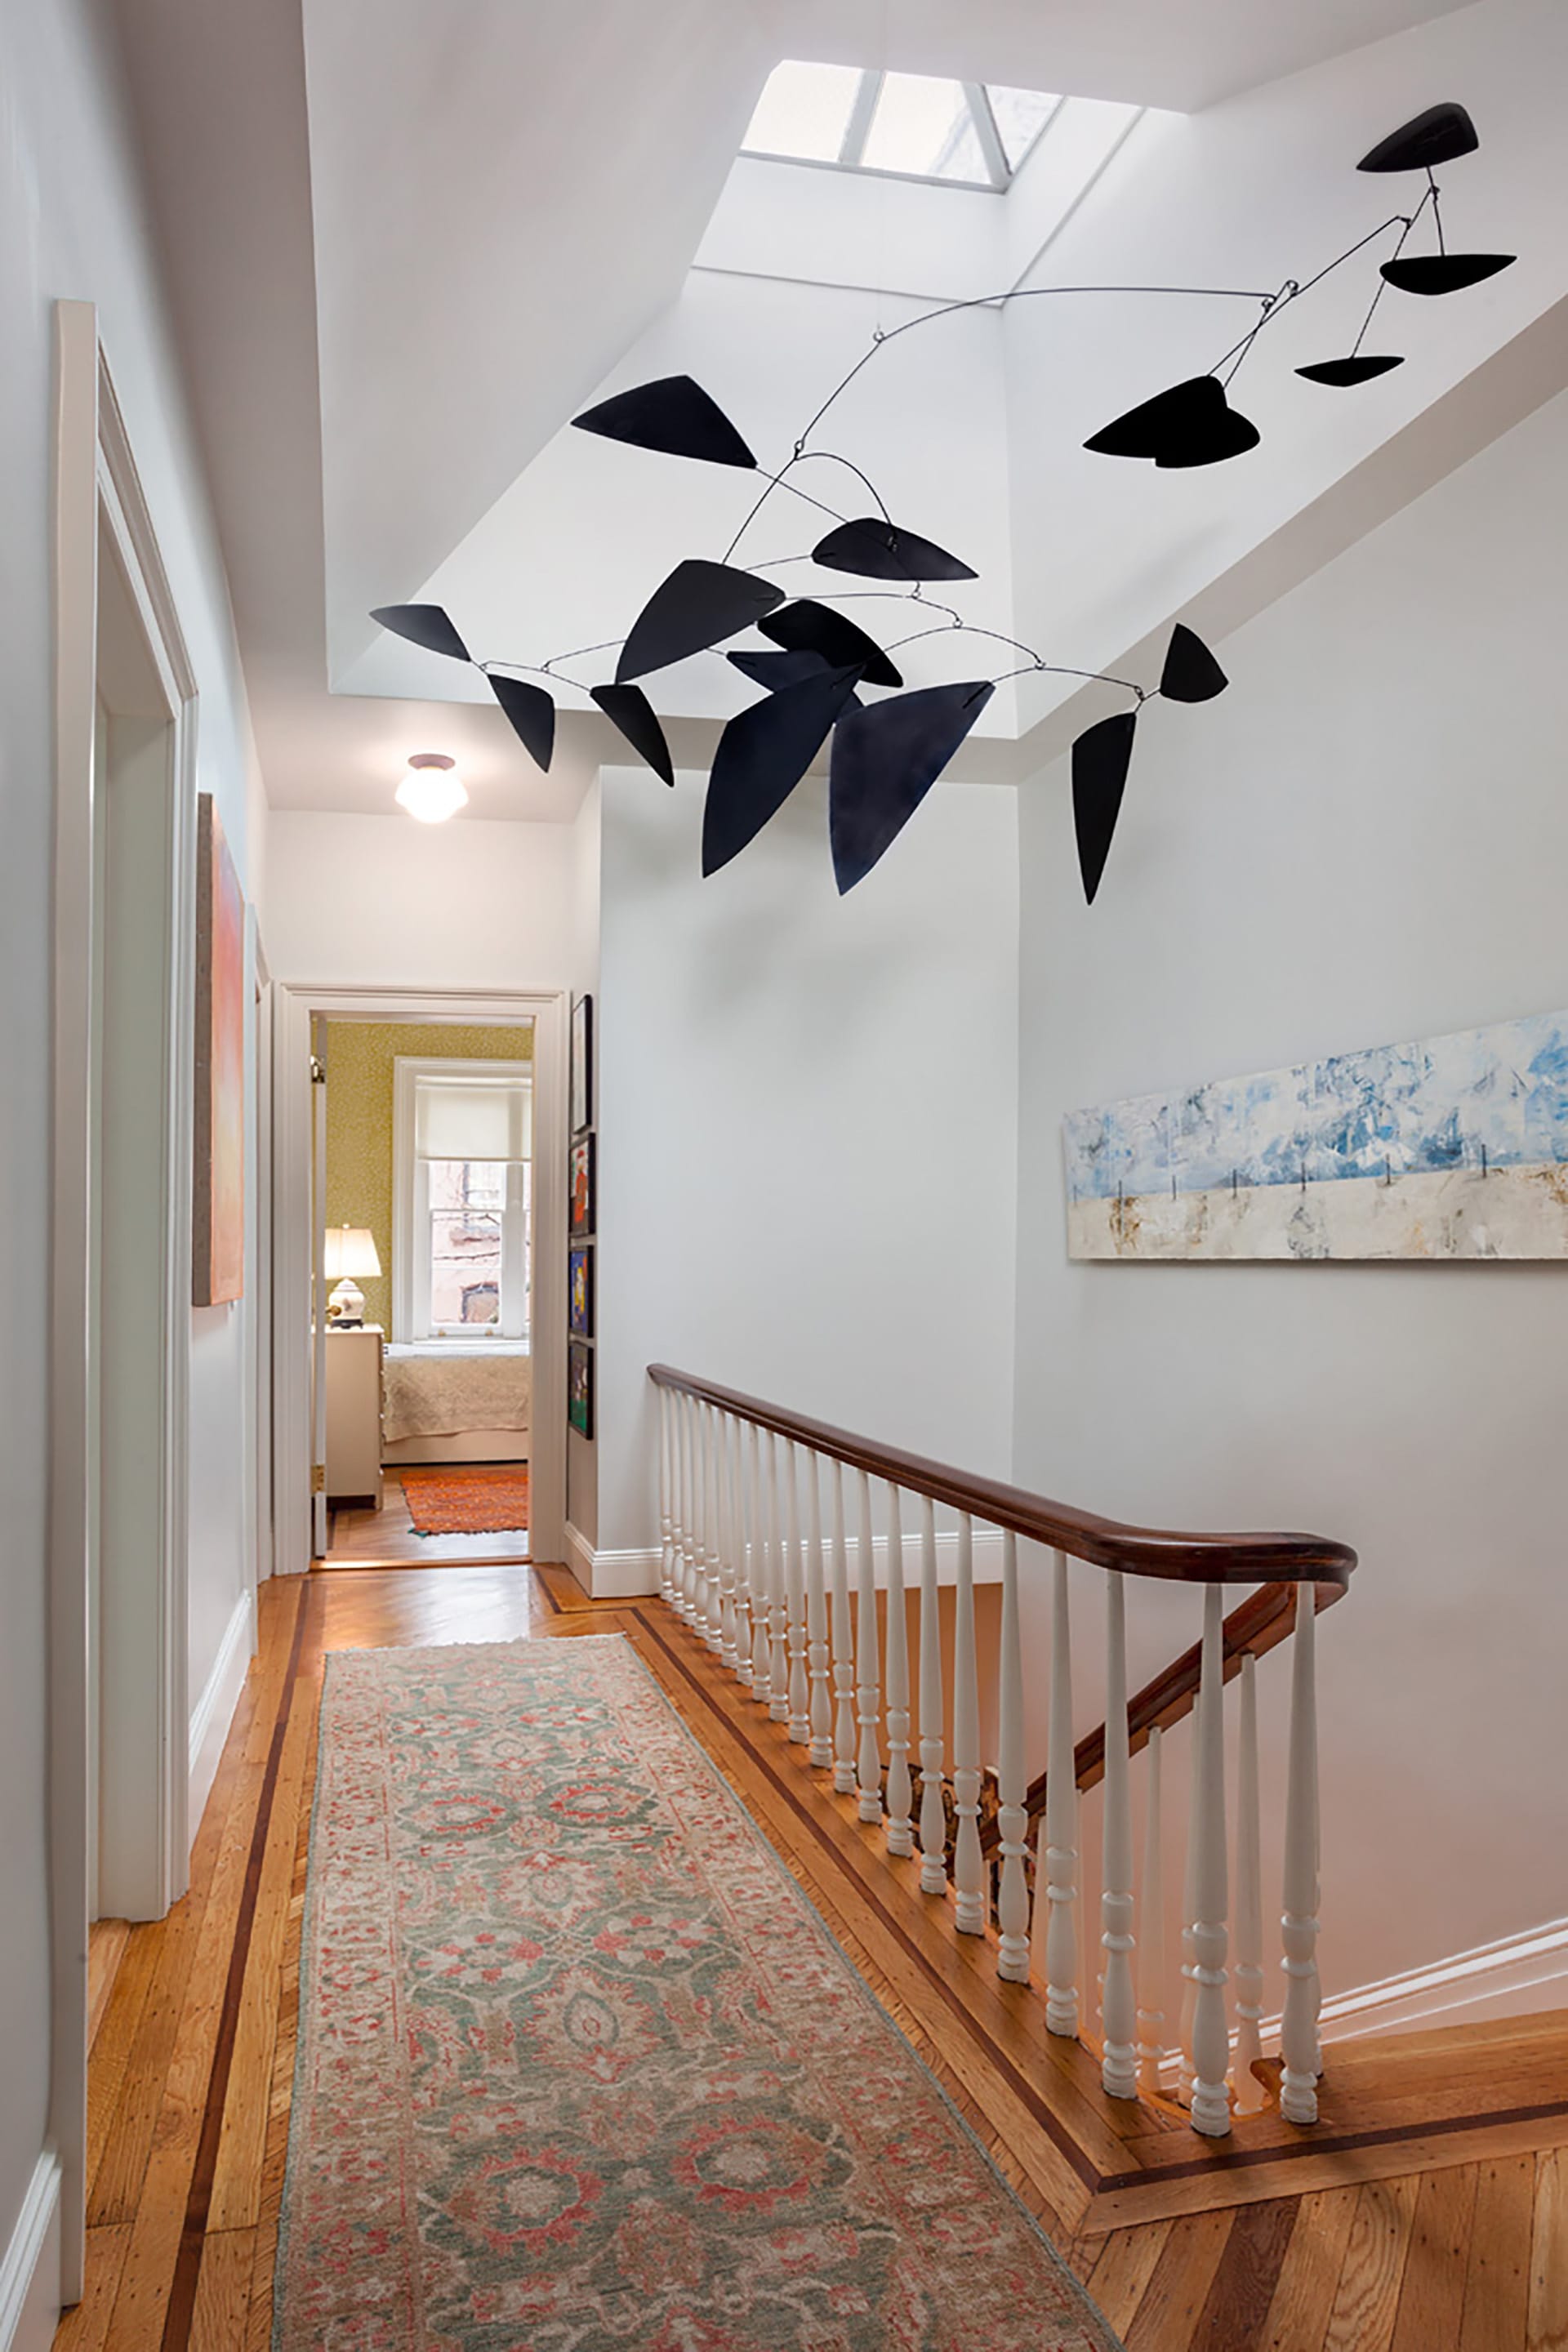 Newly splayed skylight with a hanging sculpture above the main staircase of a Brooklyn Heights home